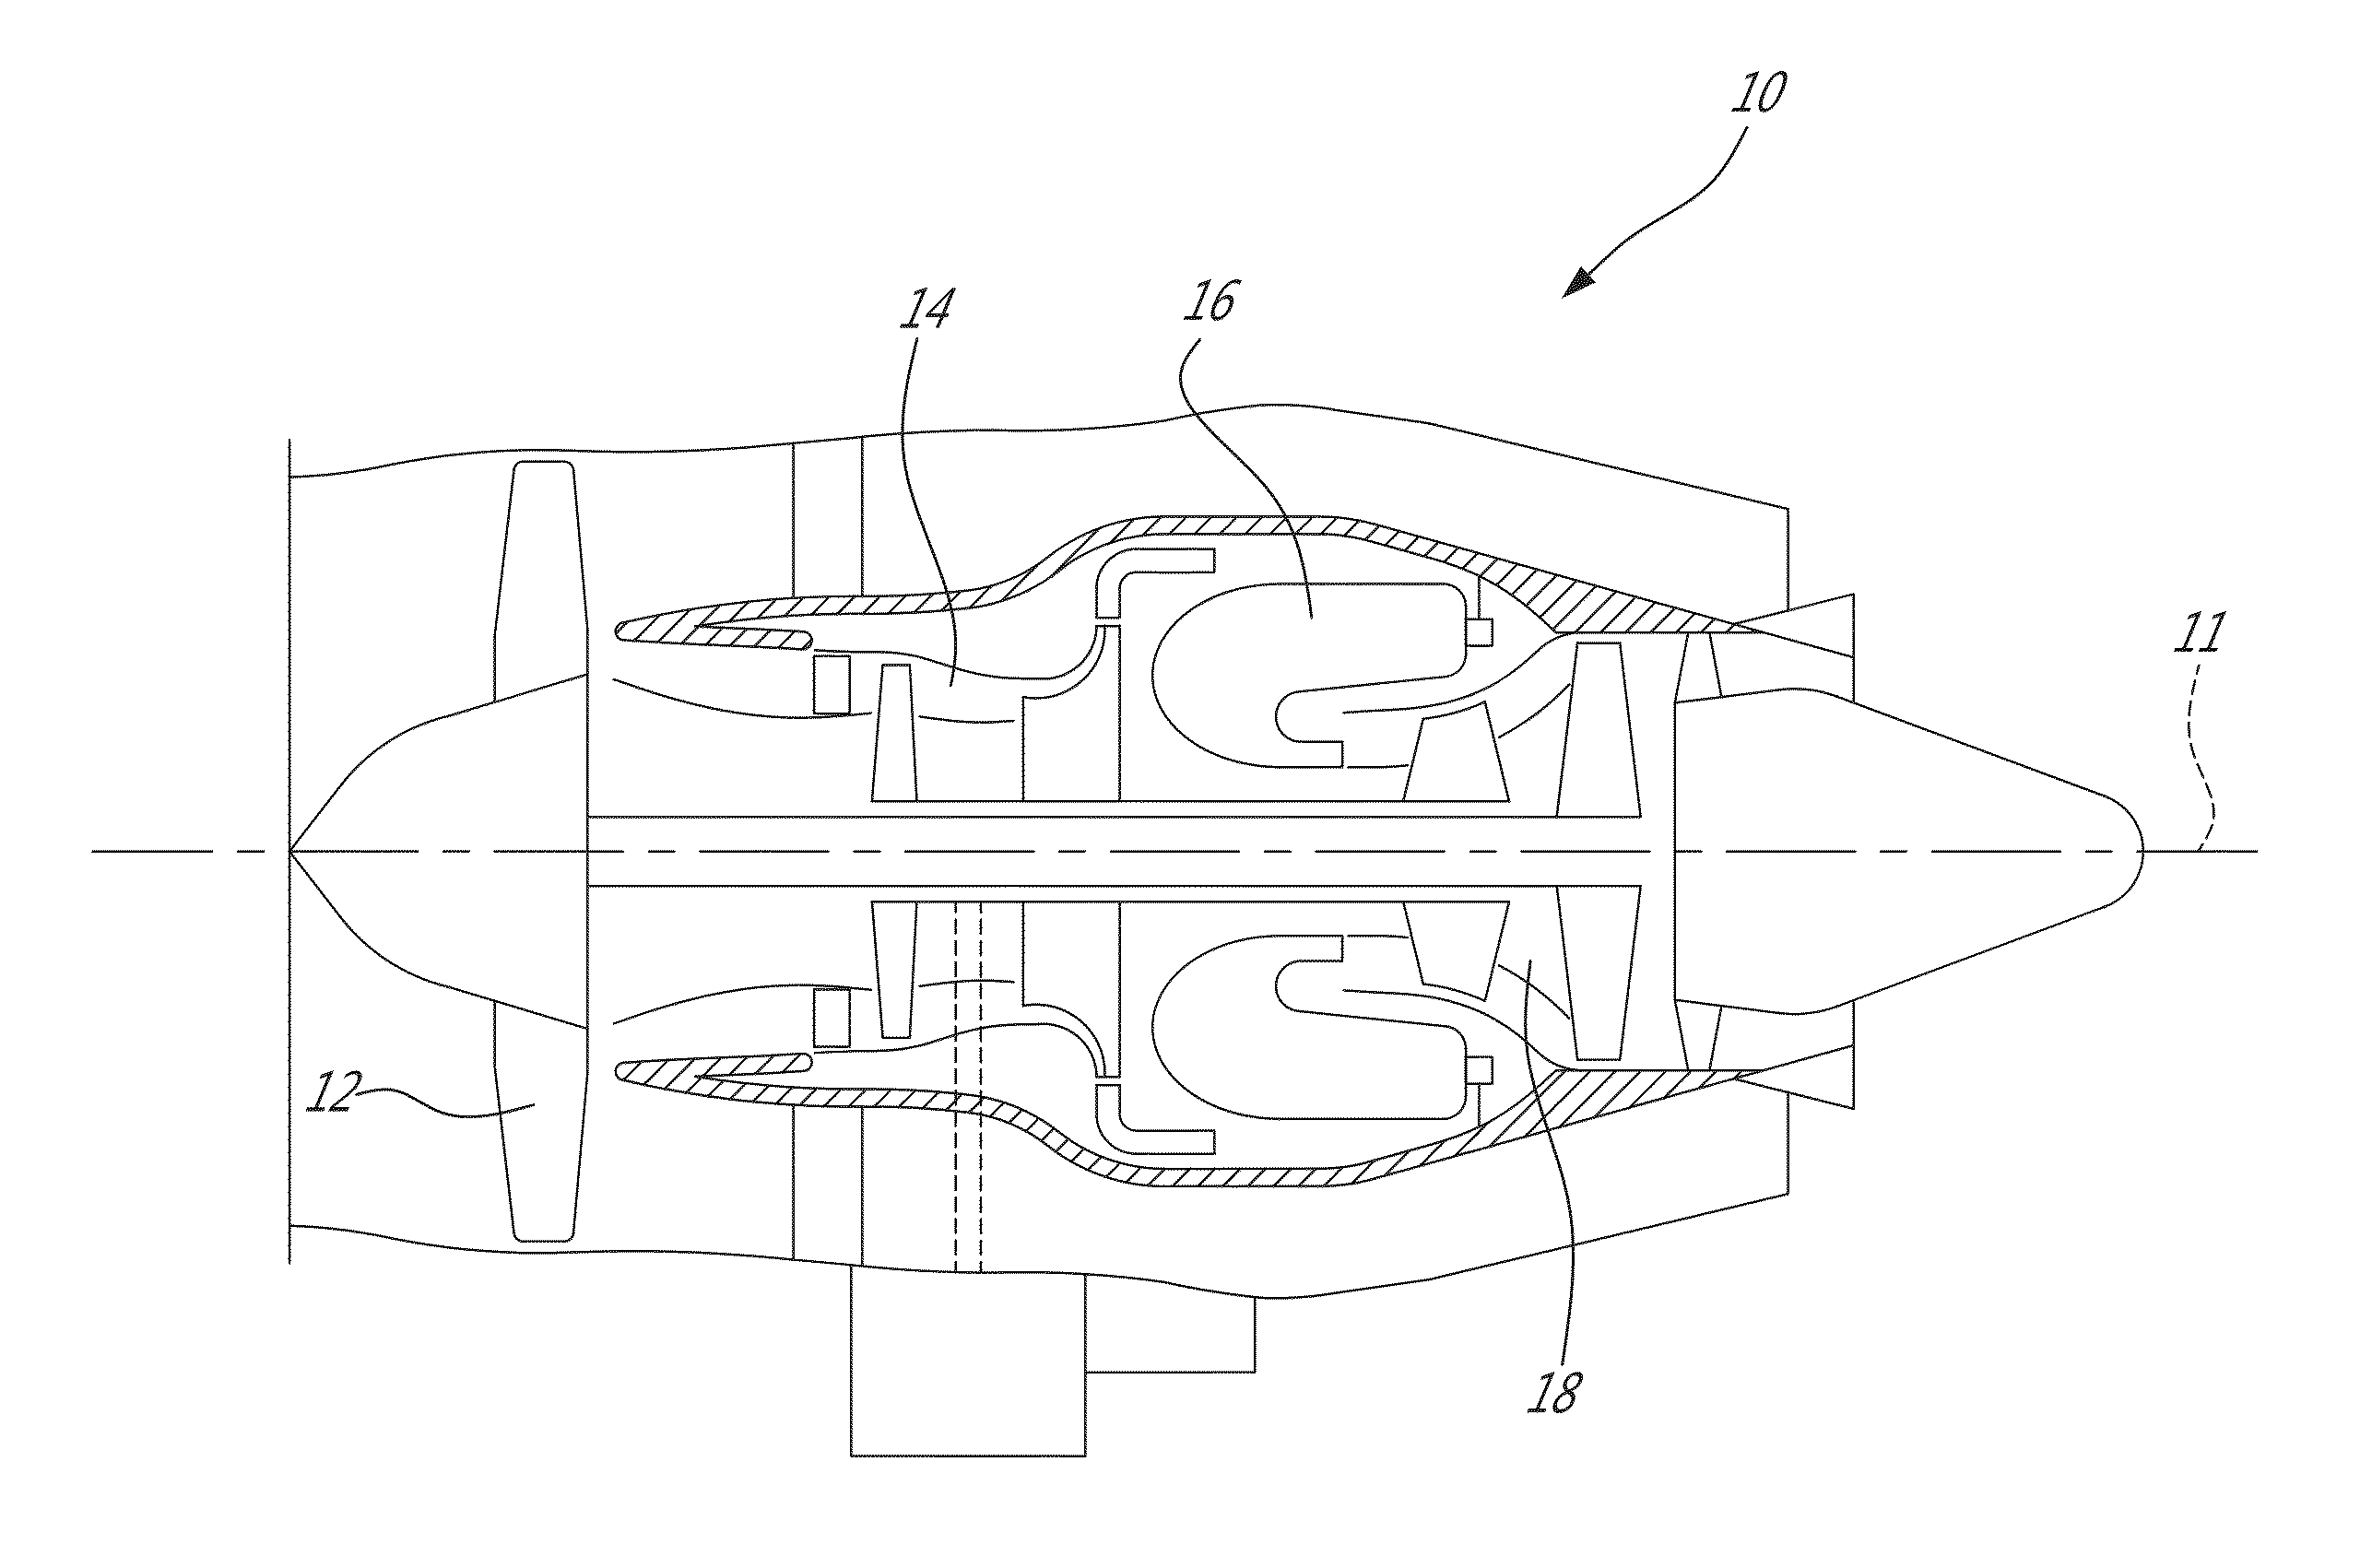 Method of forming an abradable coating for a gas turbine engine